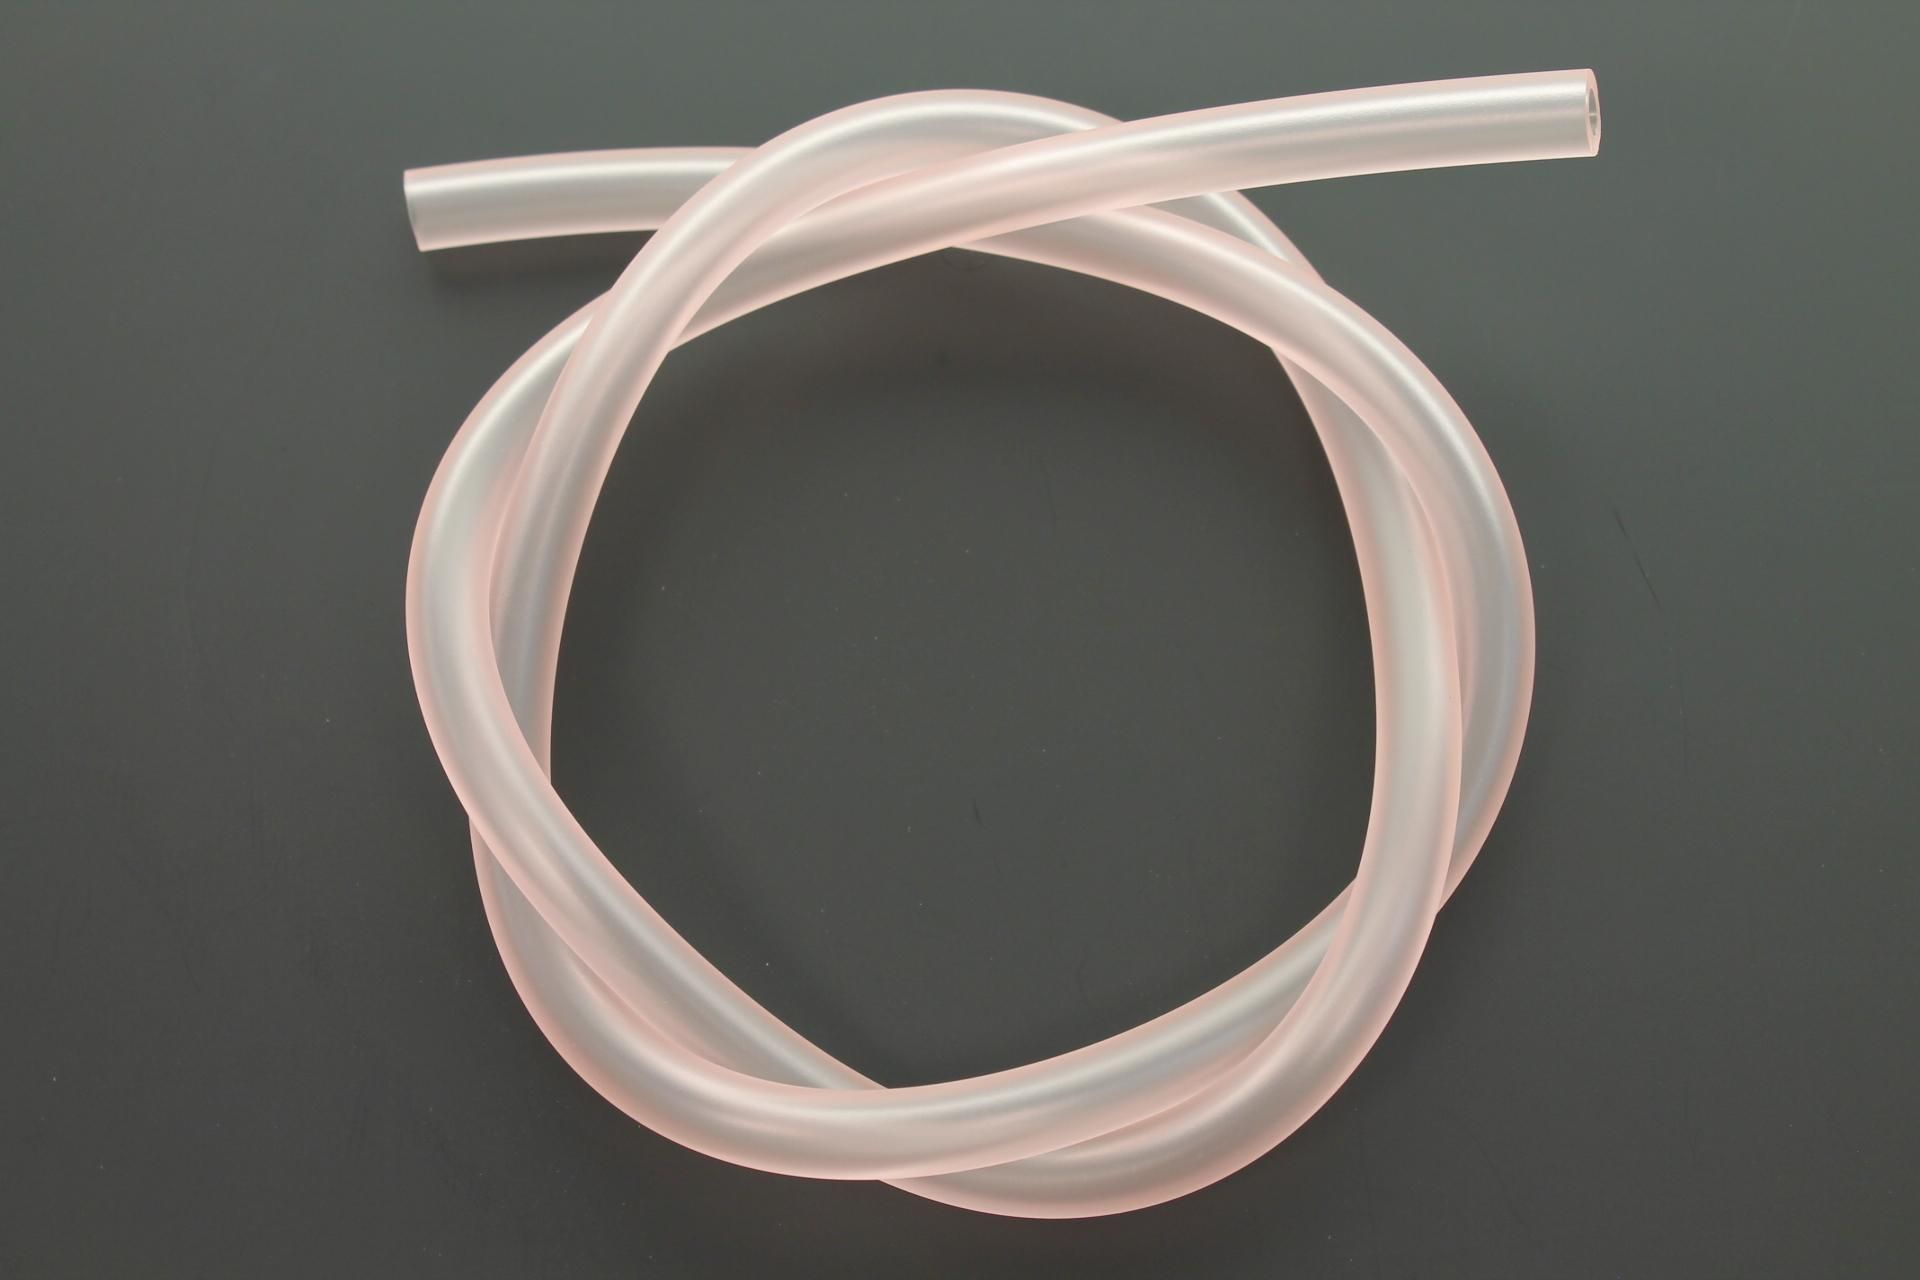 91A20-05045-00 Superseded by 91A20-05080-00 - TUBE, FLEXIBLE